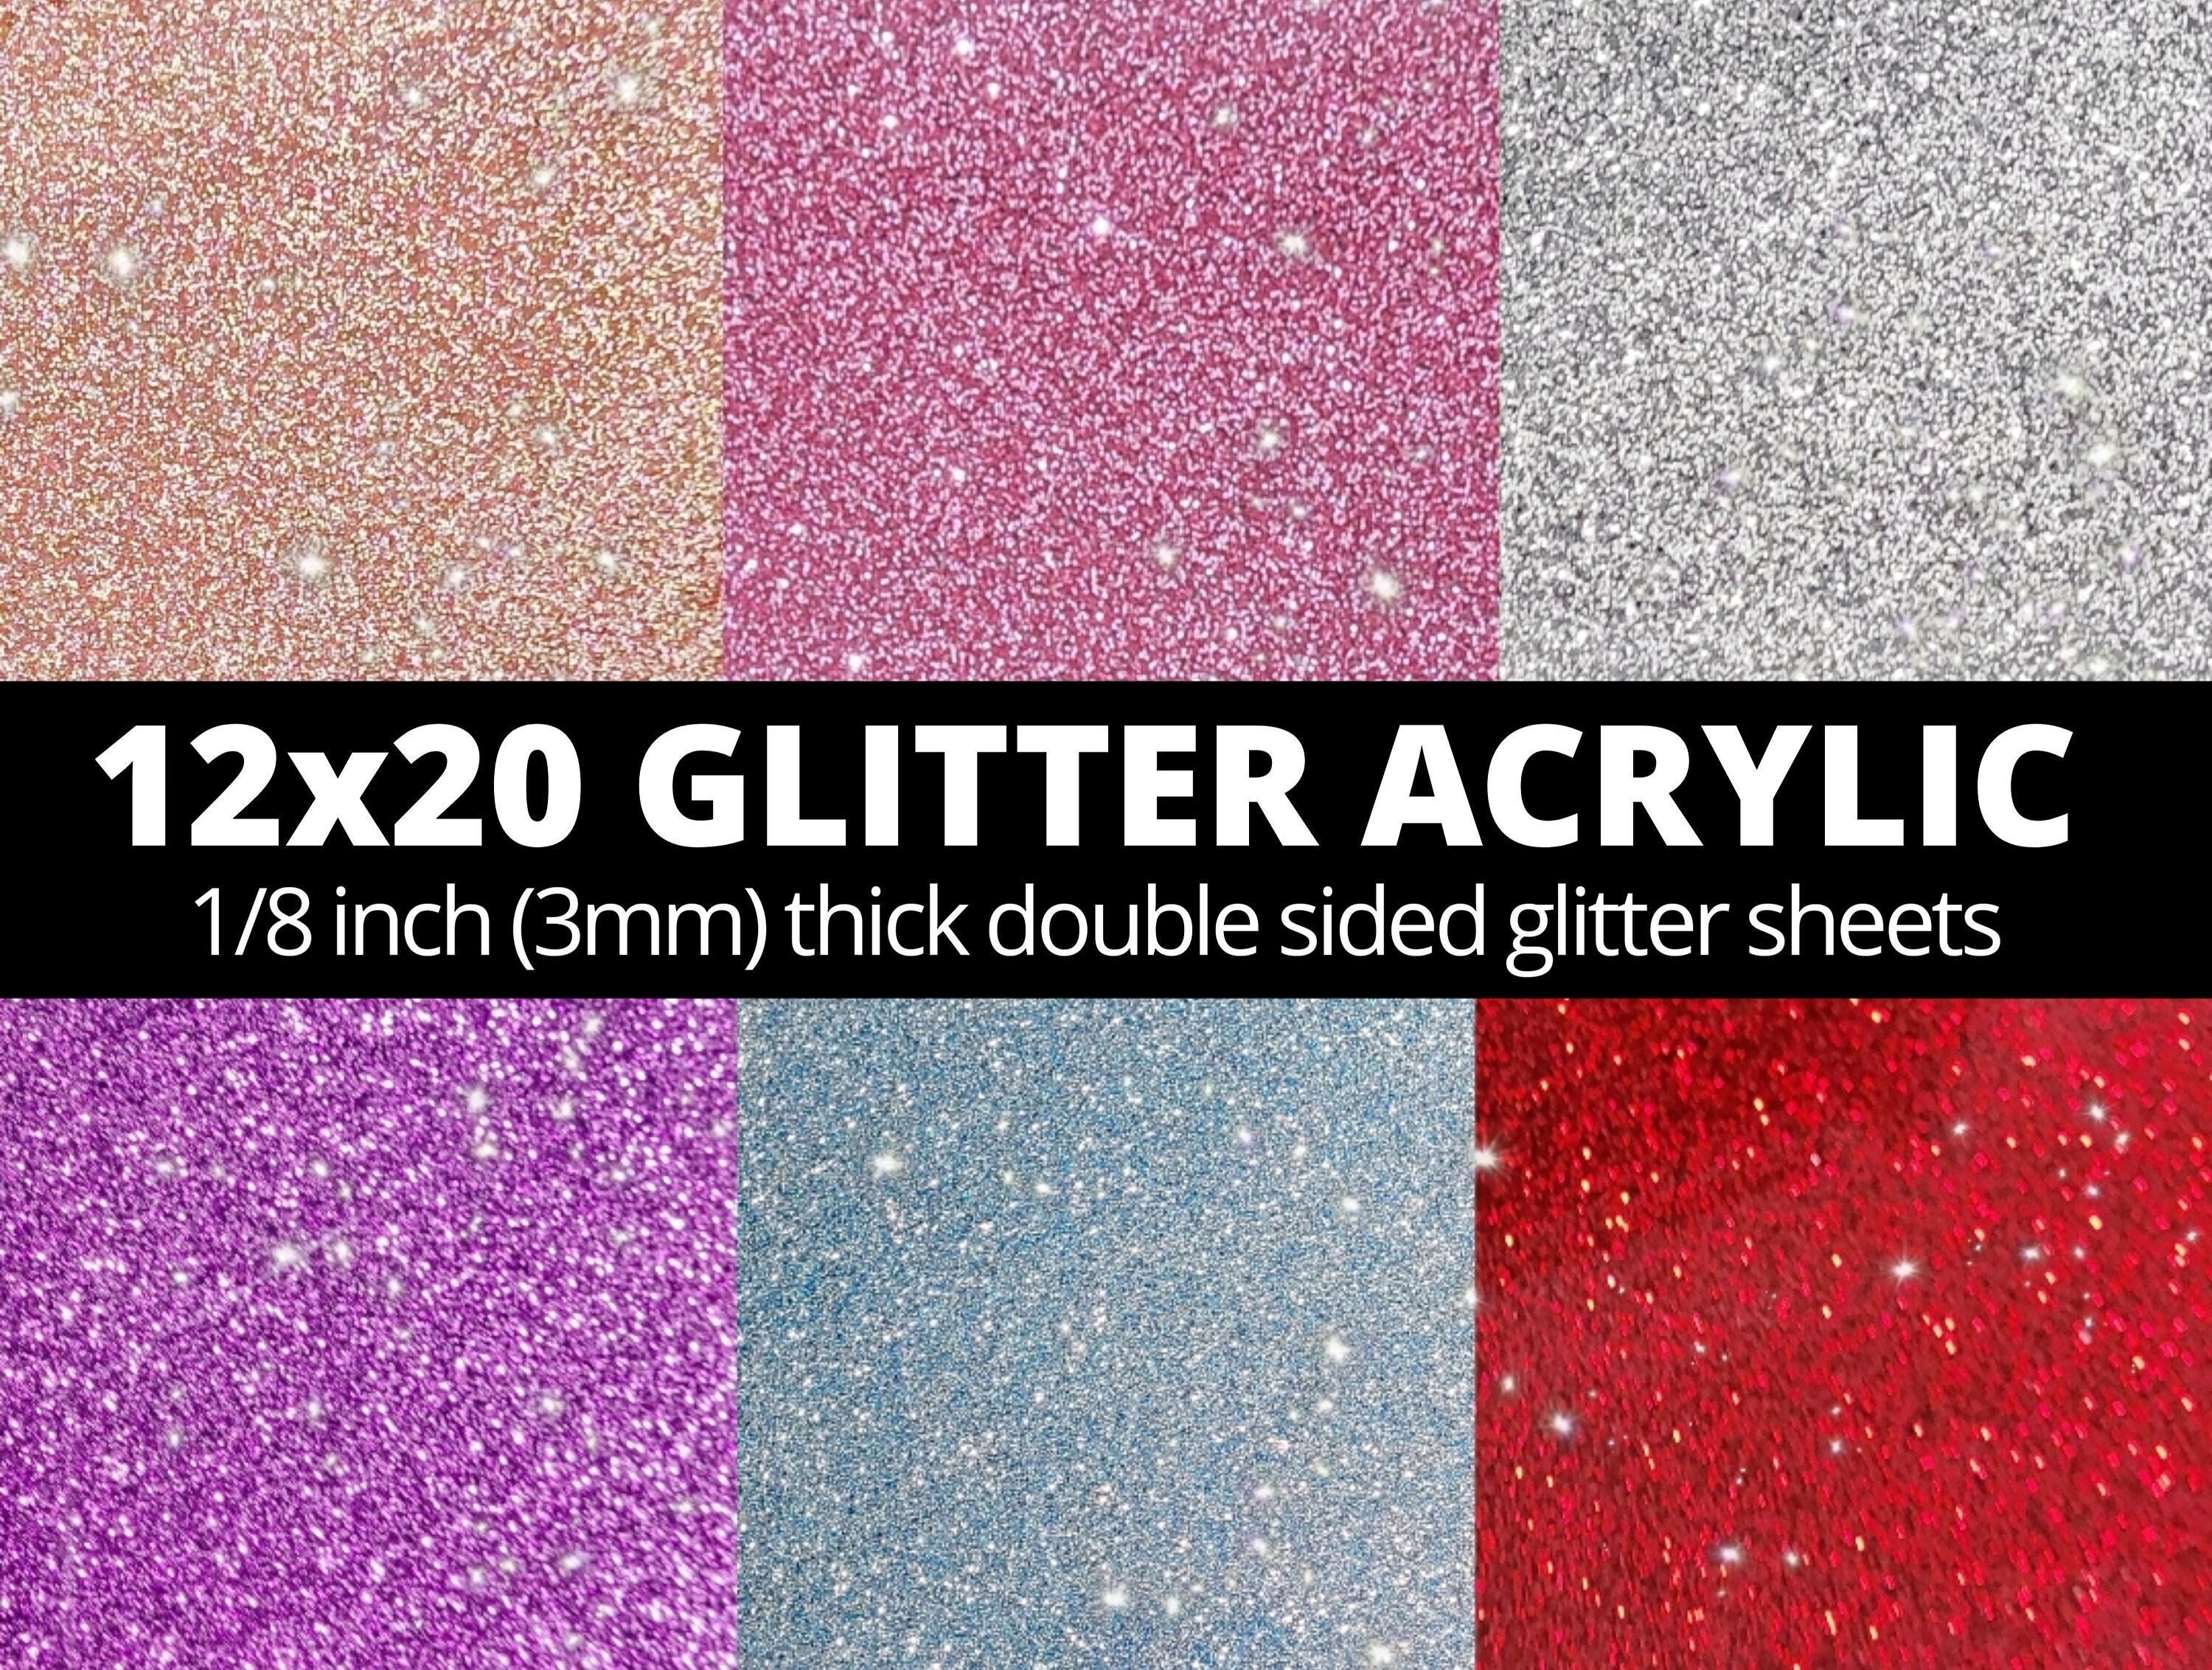 TroGlass Glitter - glitter acrylic sheets for laser engraving and cutting